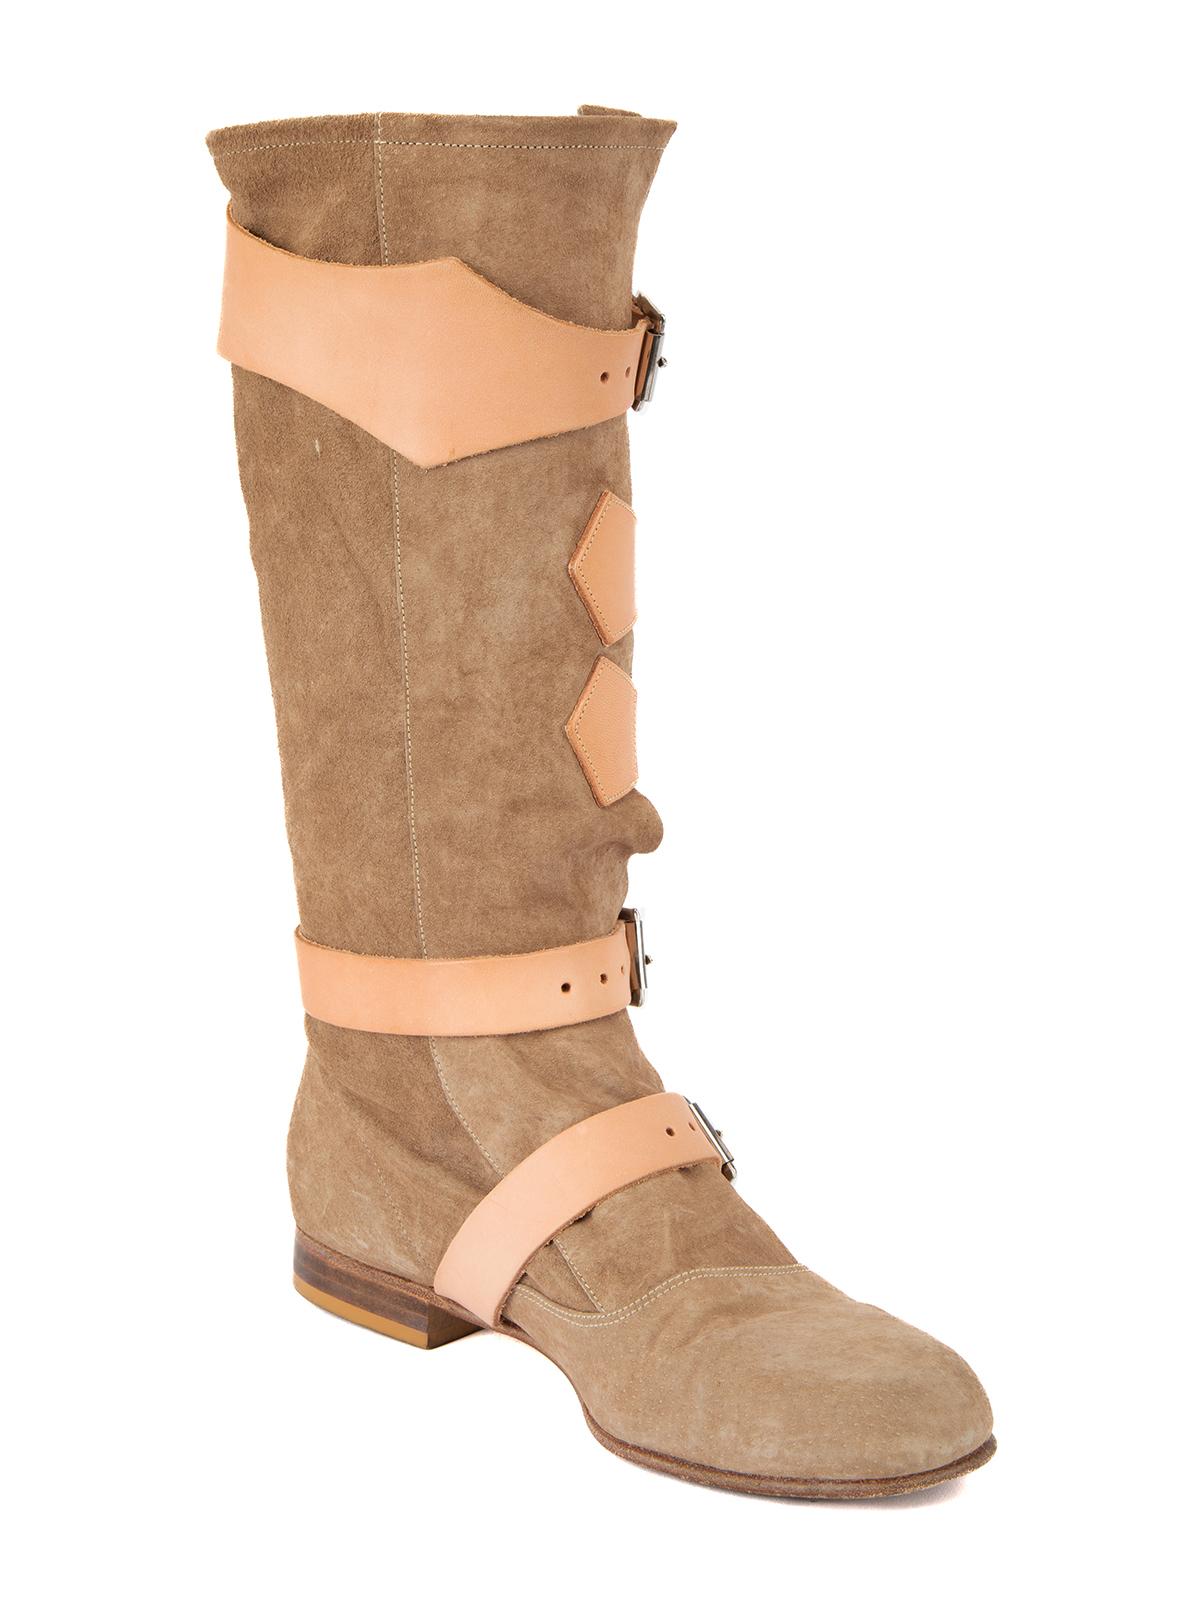 CONDITION is Good. General wear to boots is evident. Moderate signs of wear to the the outsole and suede exterior where scuffs can be seen on this used Vivienne Westwood designer resale item.   Details  Brown Suede Knee high Round toe Buckle details